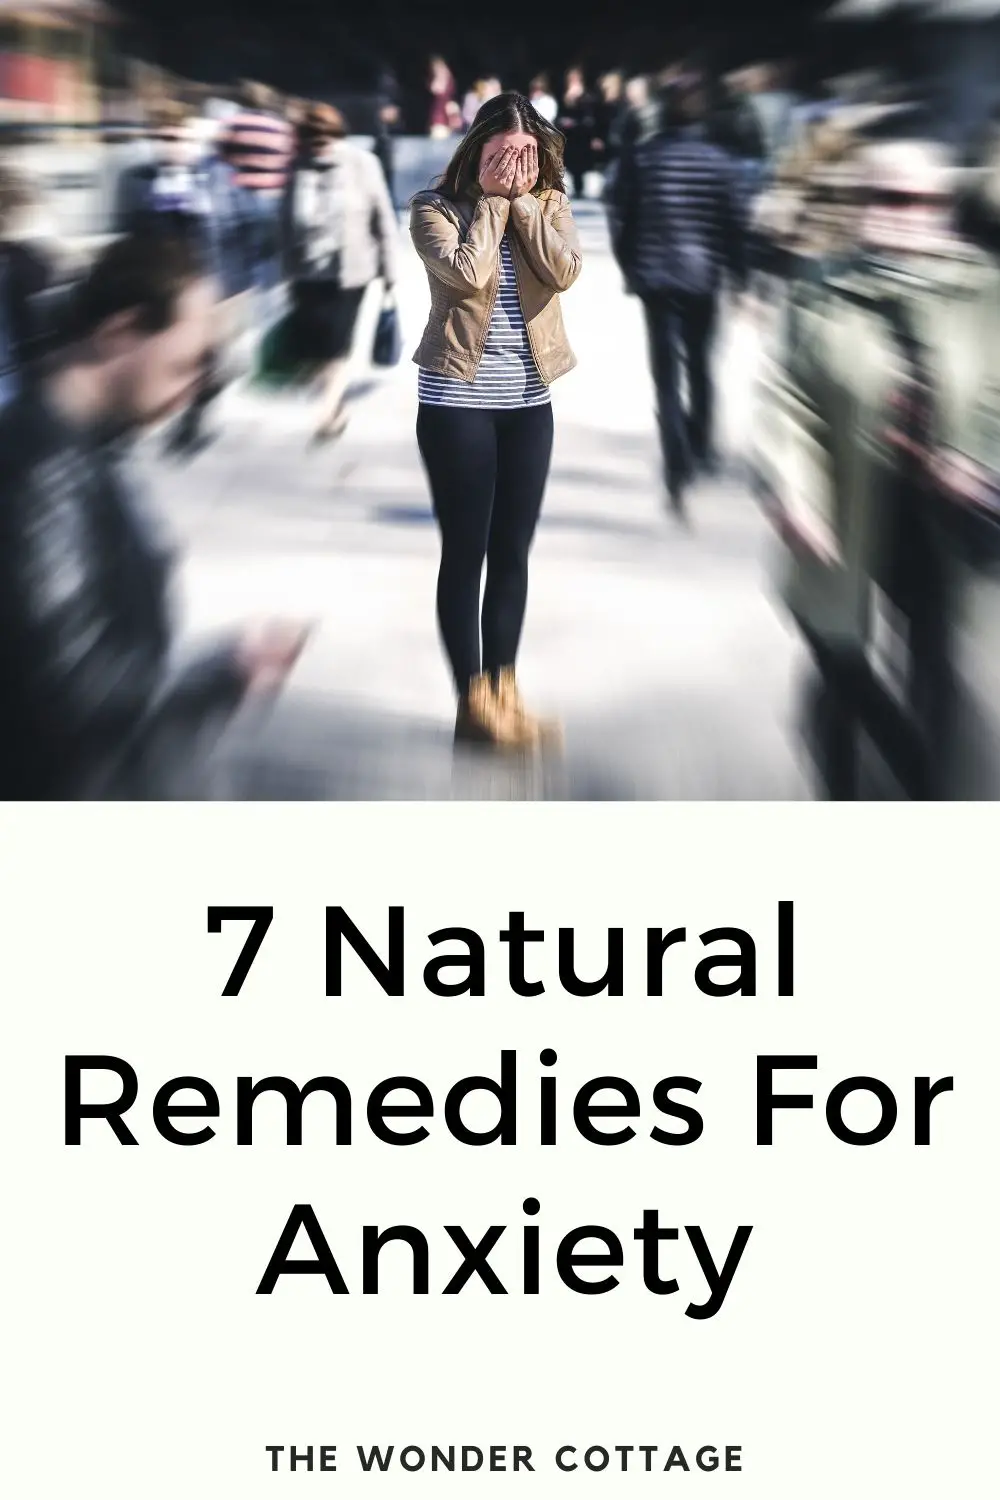 7 natural remedies for anxiety